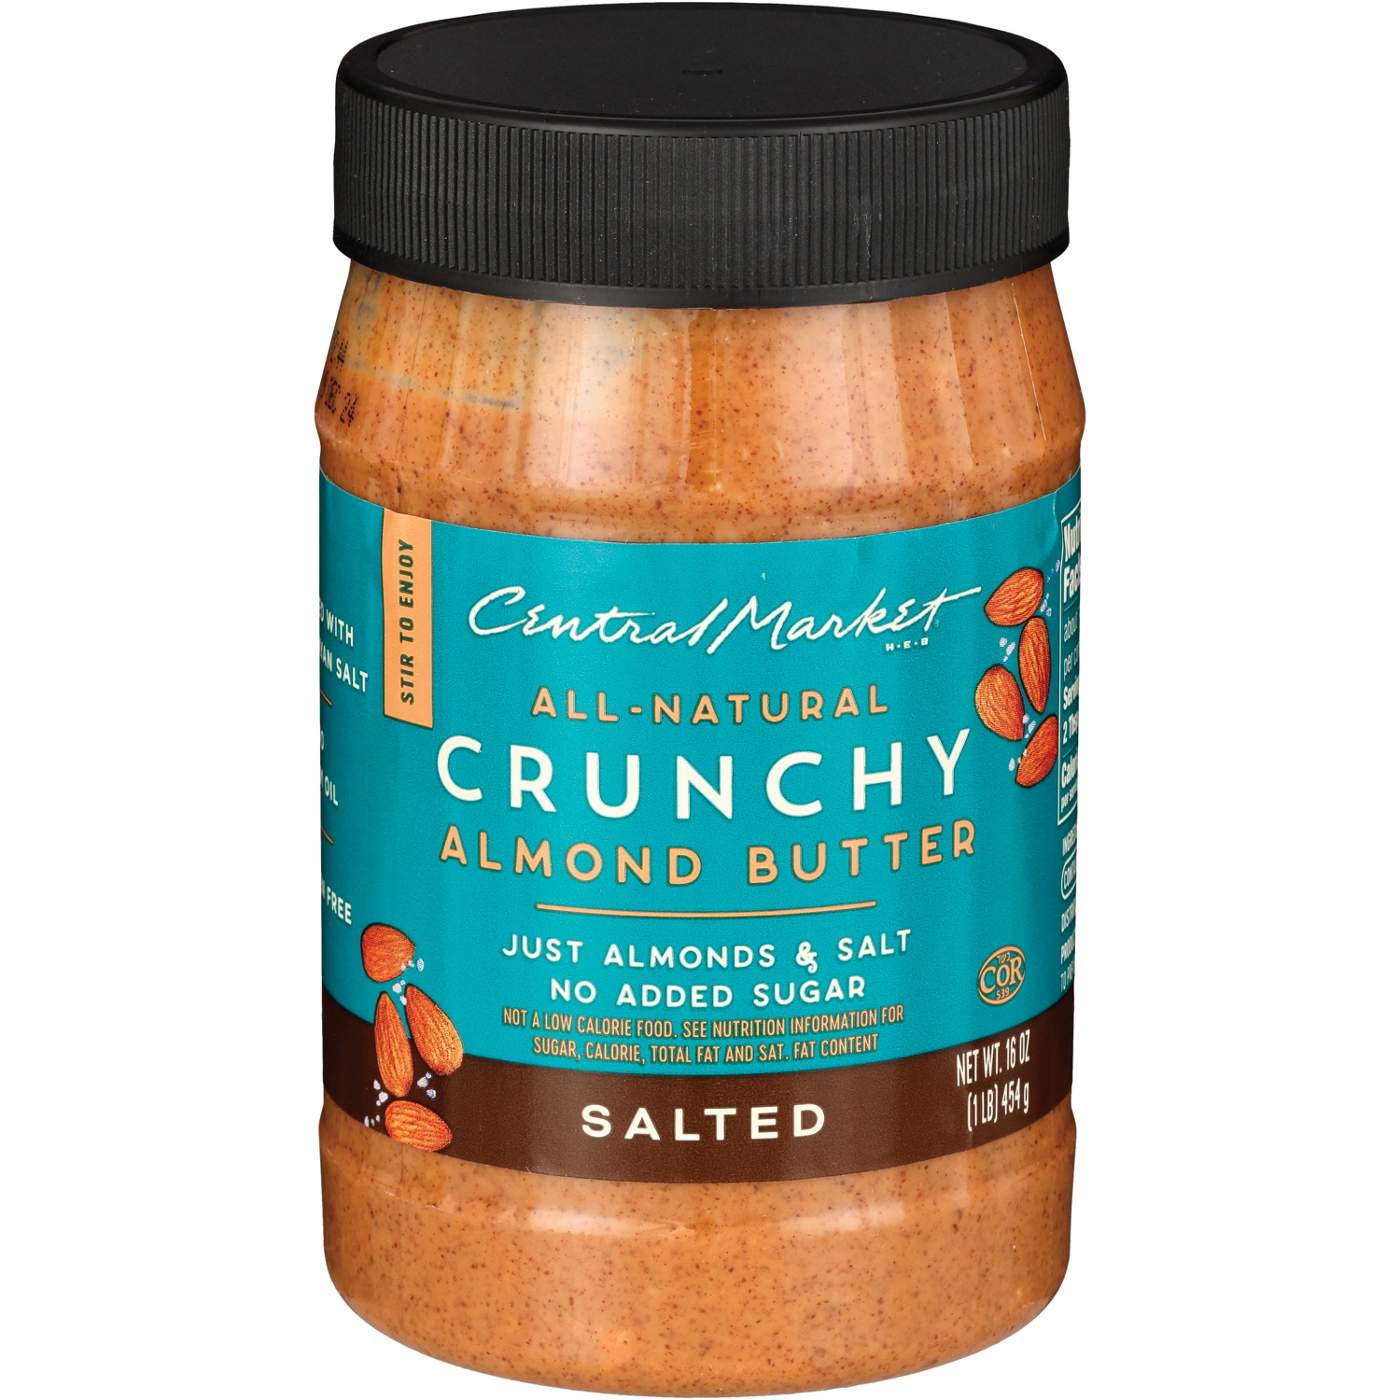 Central Market All-Natural Crunchy Almond Butter – Salted; image 2 of 2